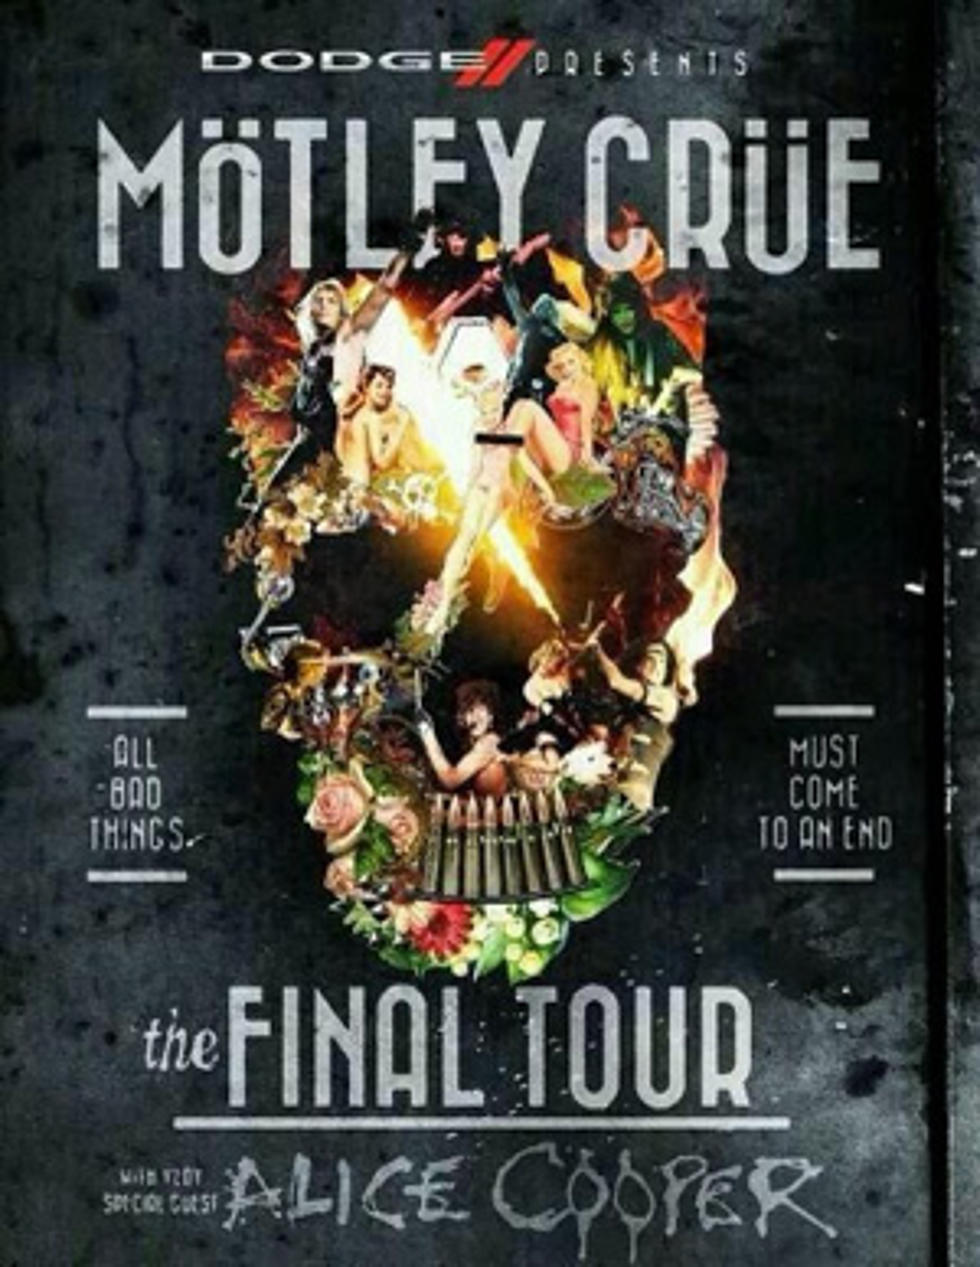 Motley Crue Adds Dates to The Final Tour